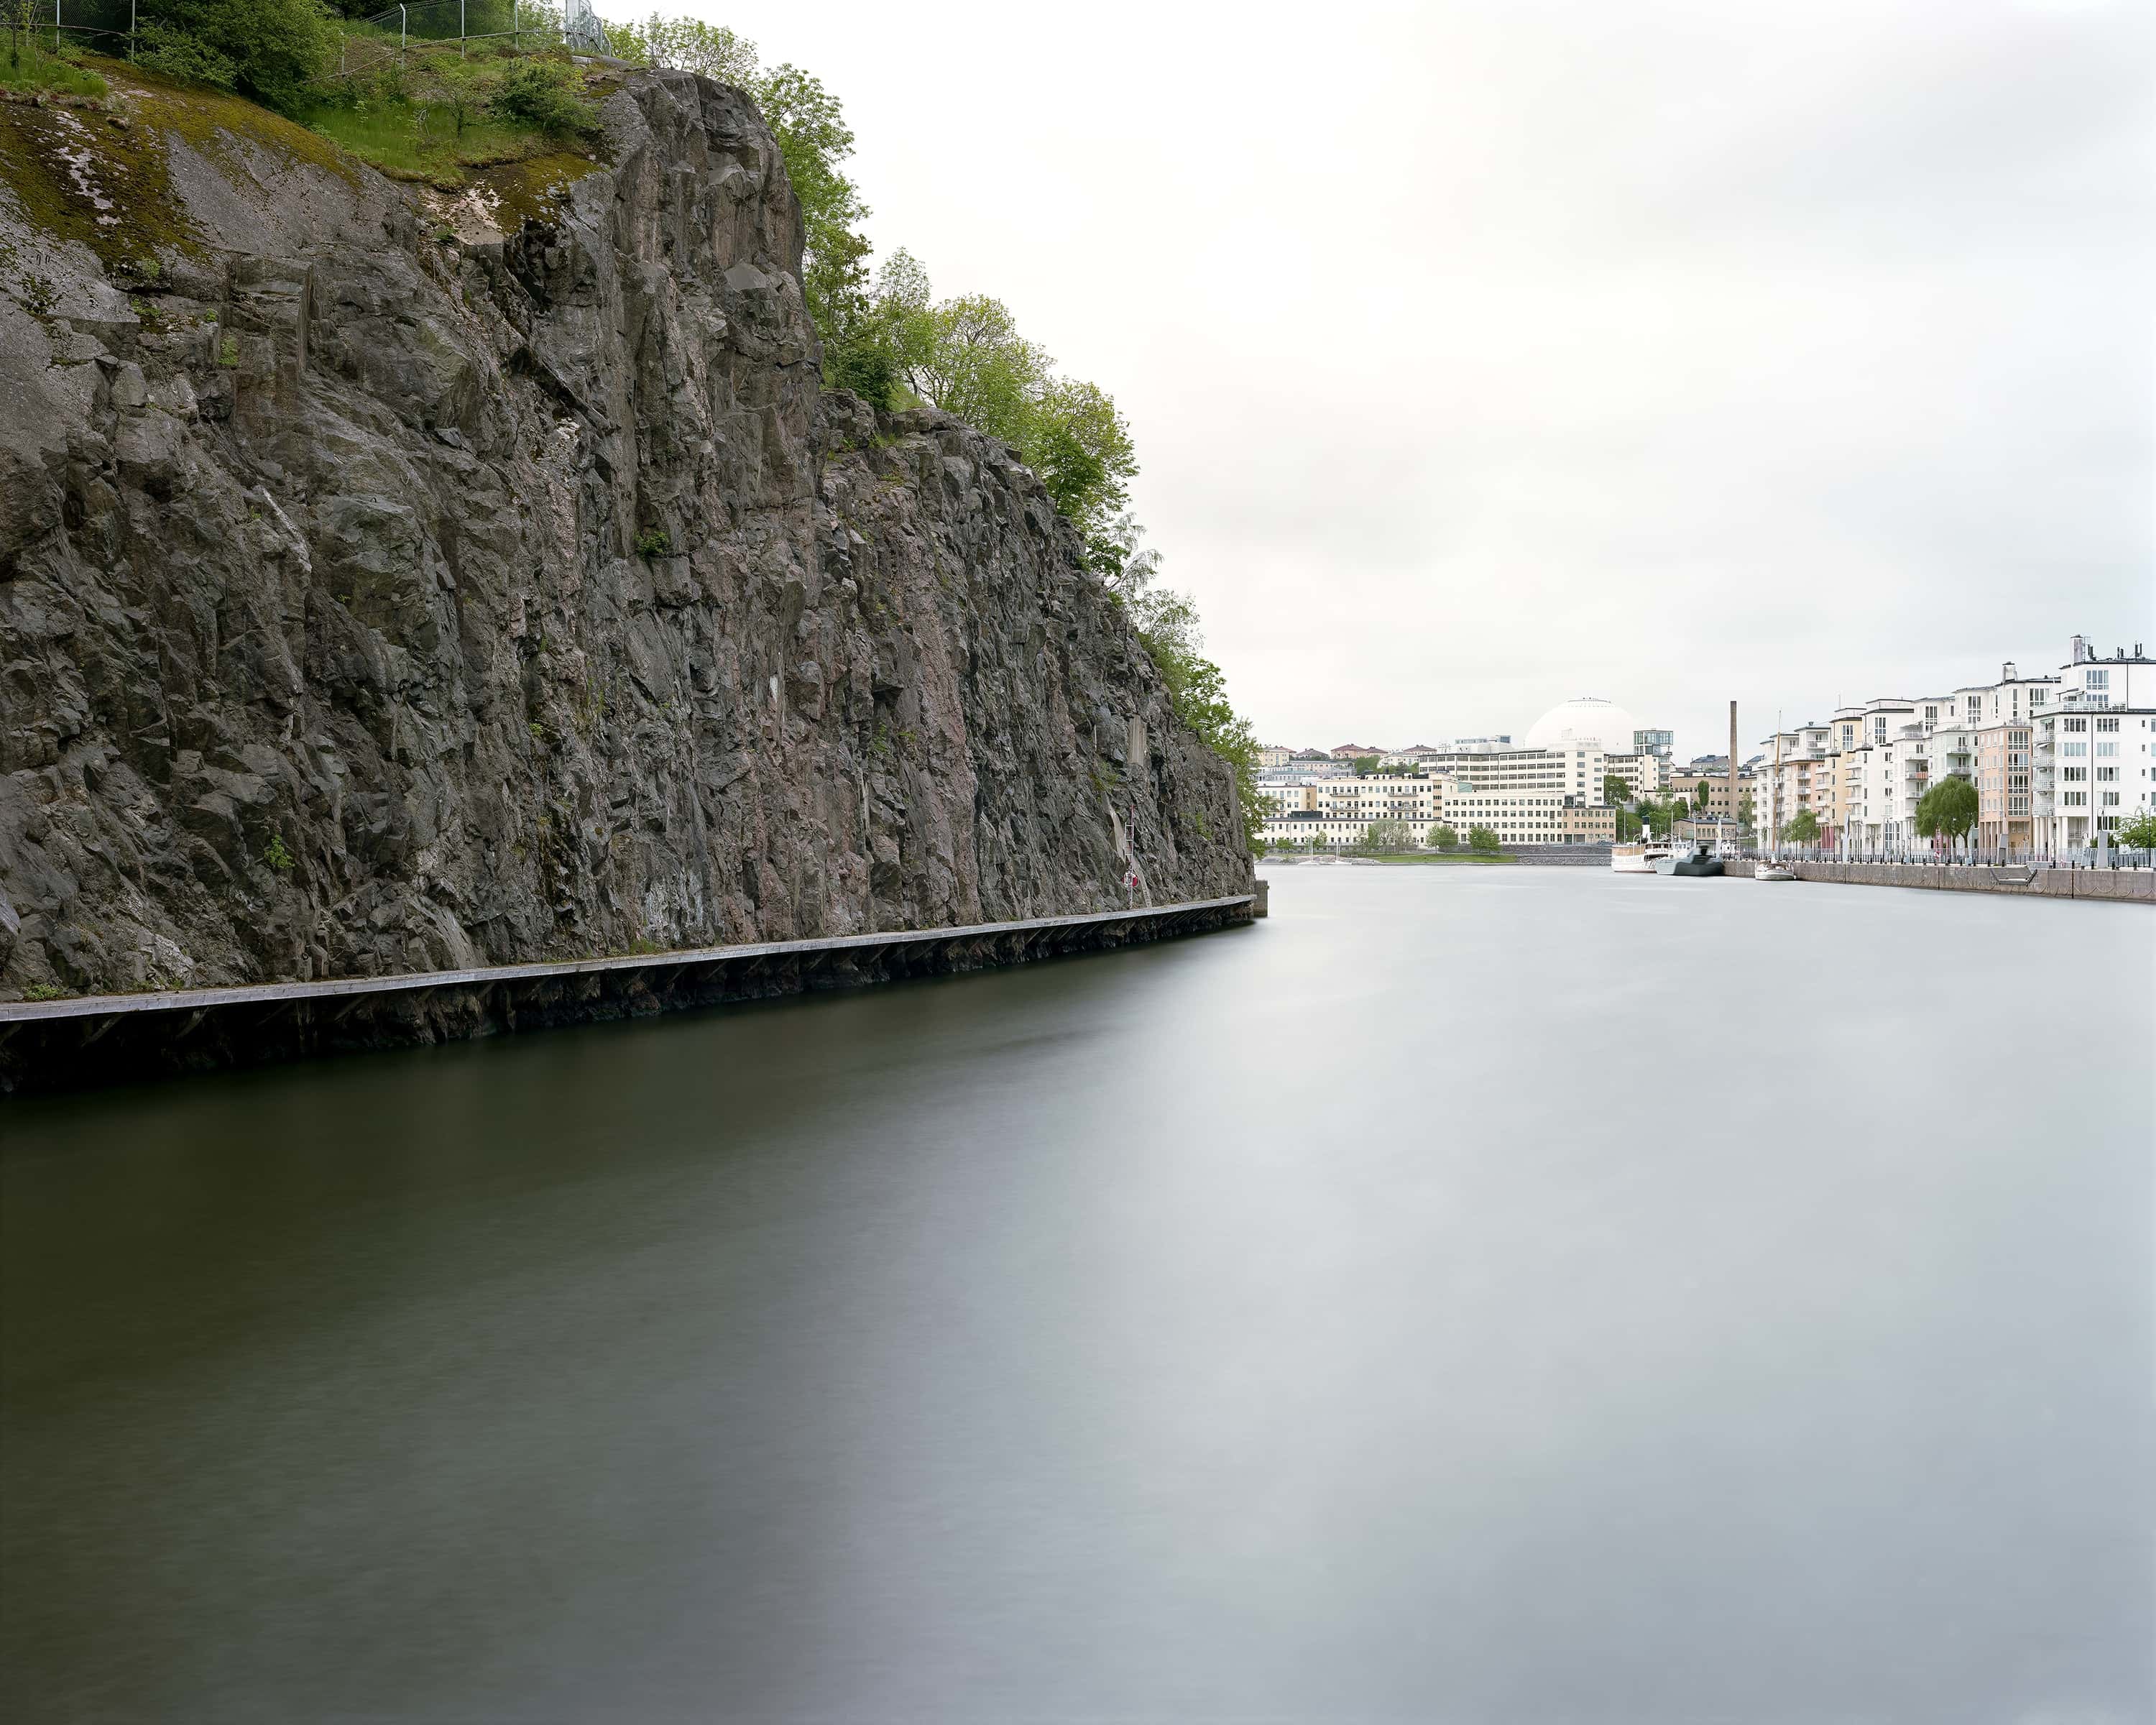 Open water and cliffs in Stockholm harbor near to where the Vasa sank.